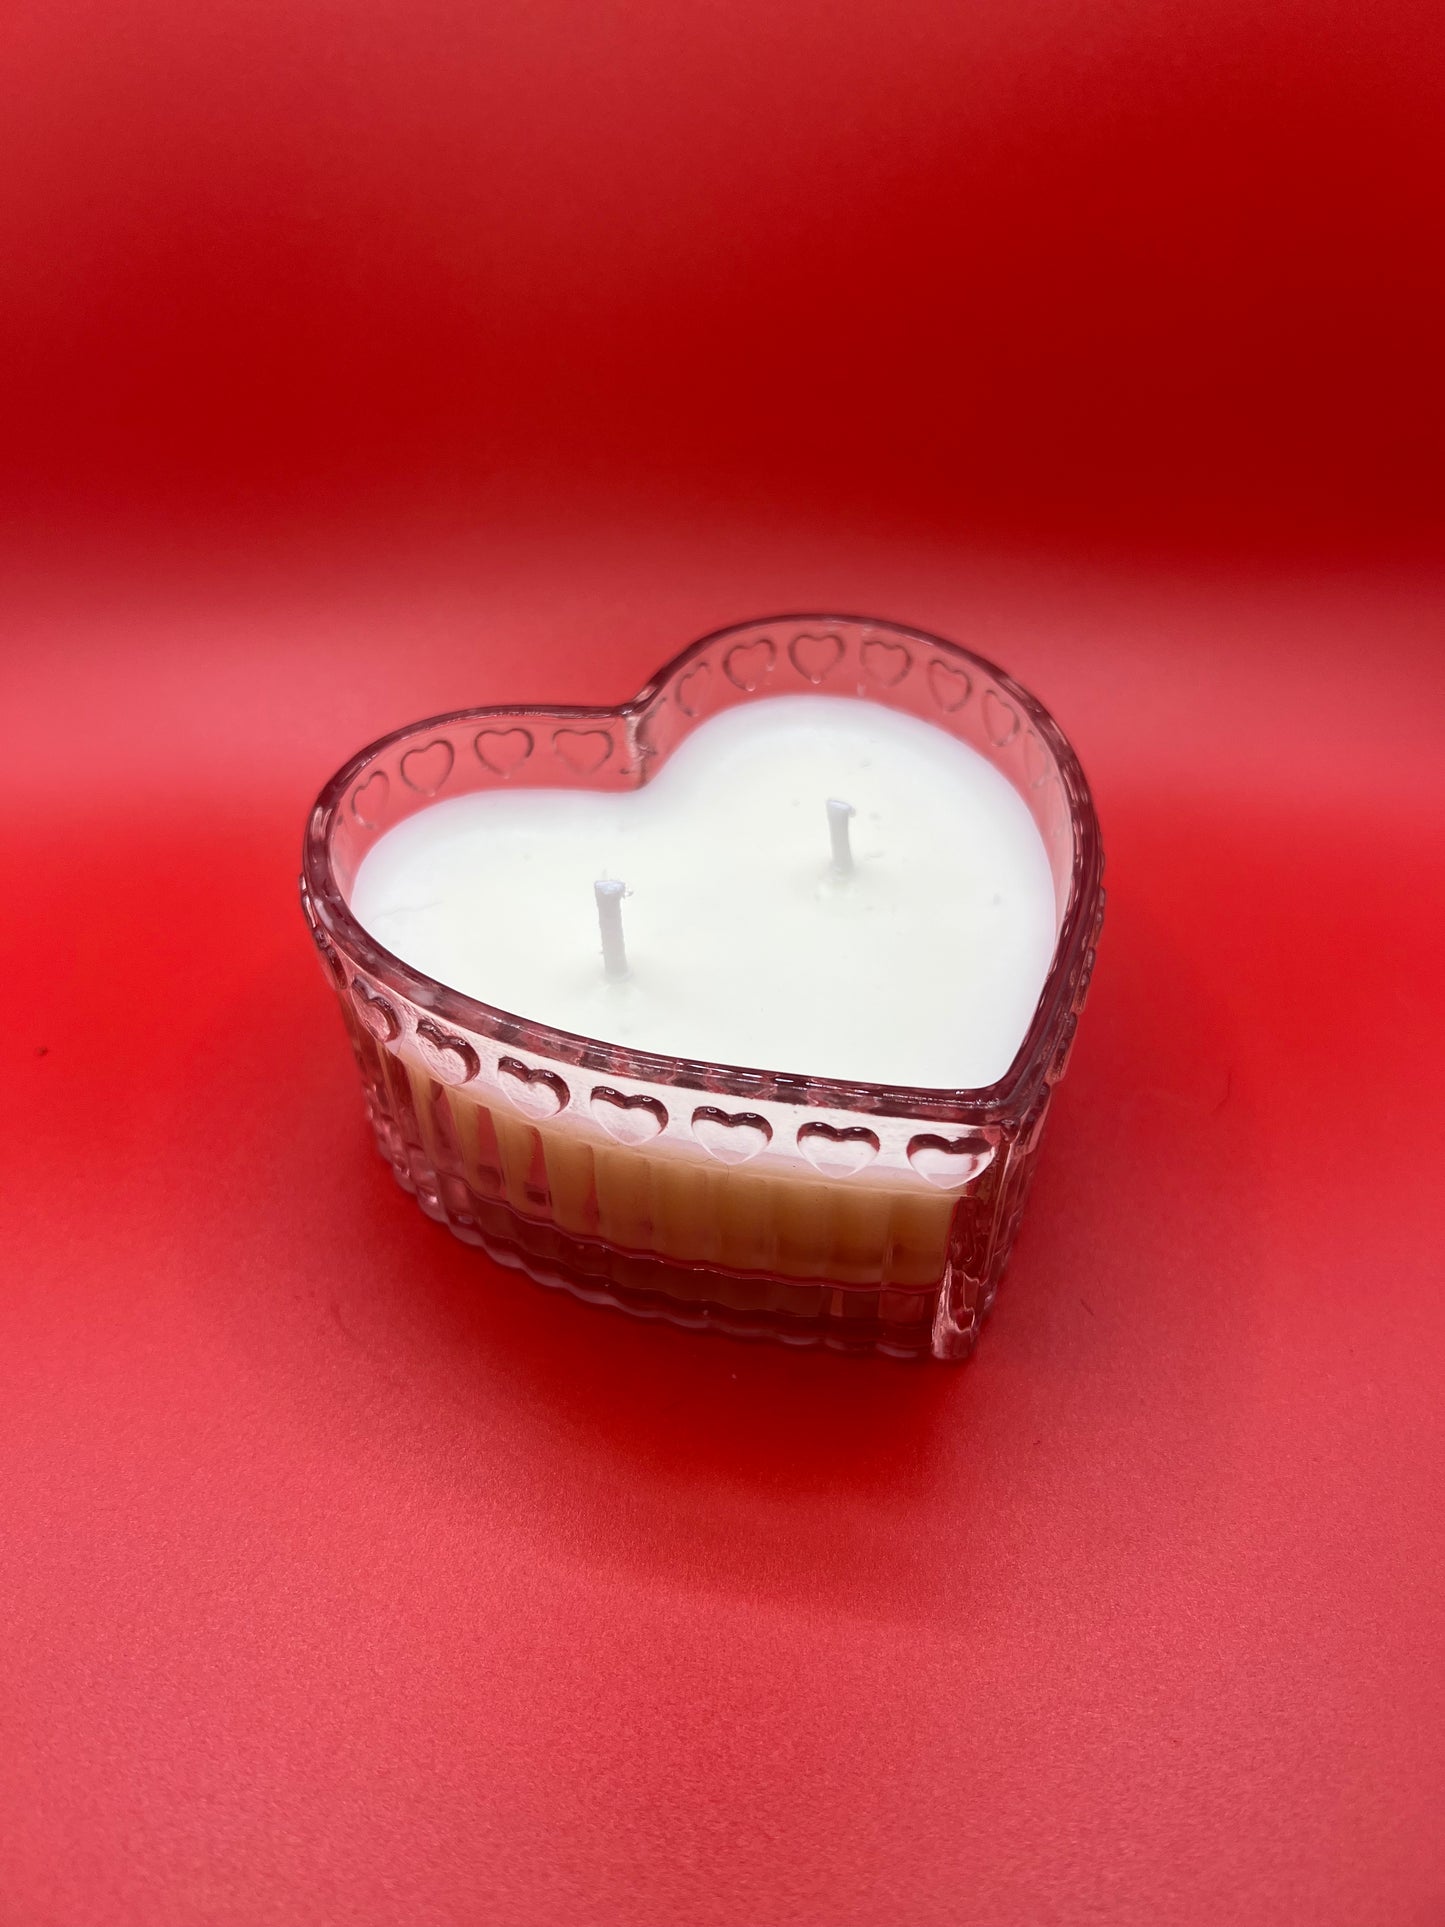 The Greatest of These Is Love Candle